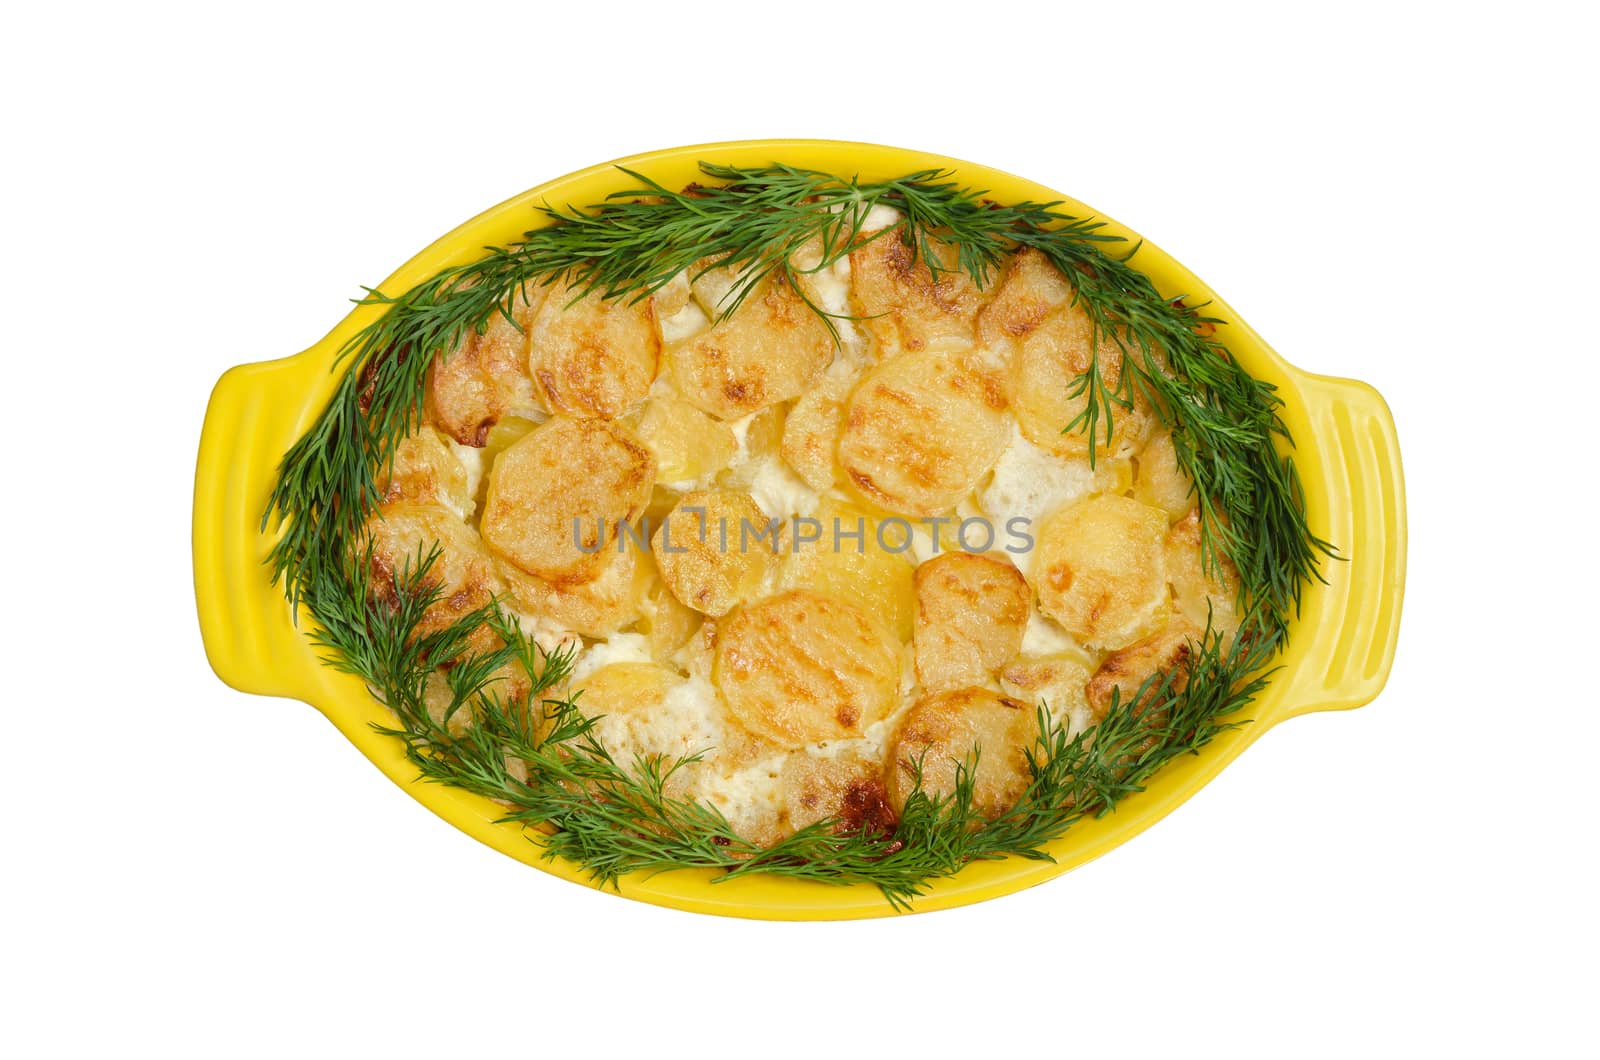 Potato slices with dill, baked in cream, isolated on white background